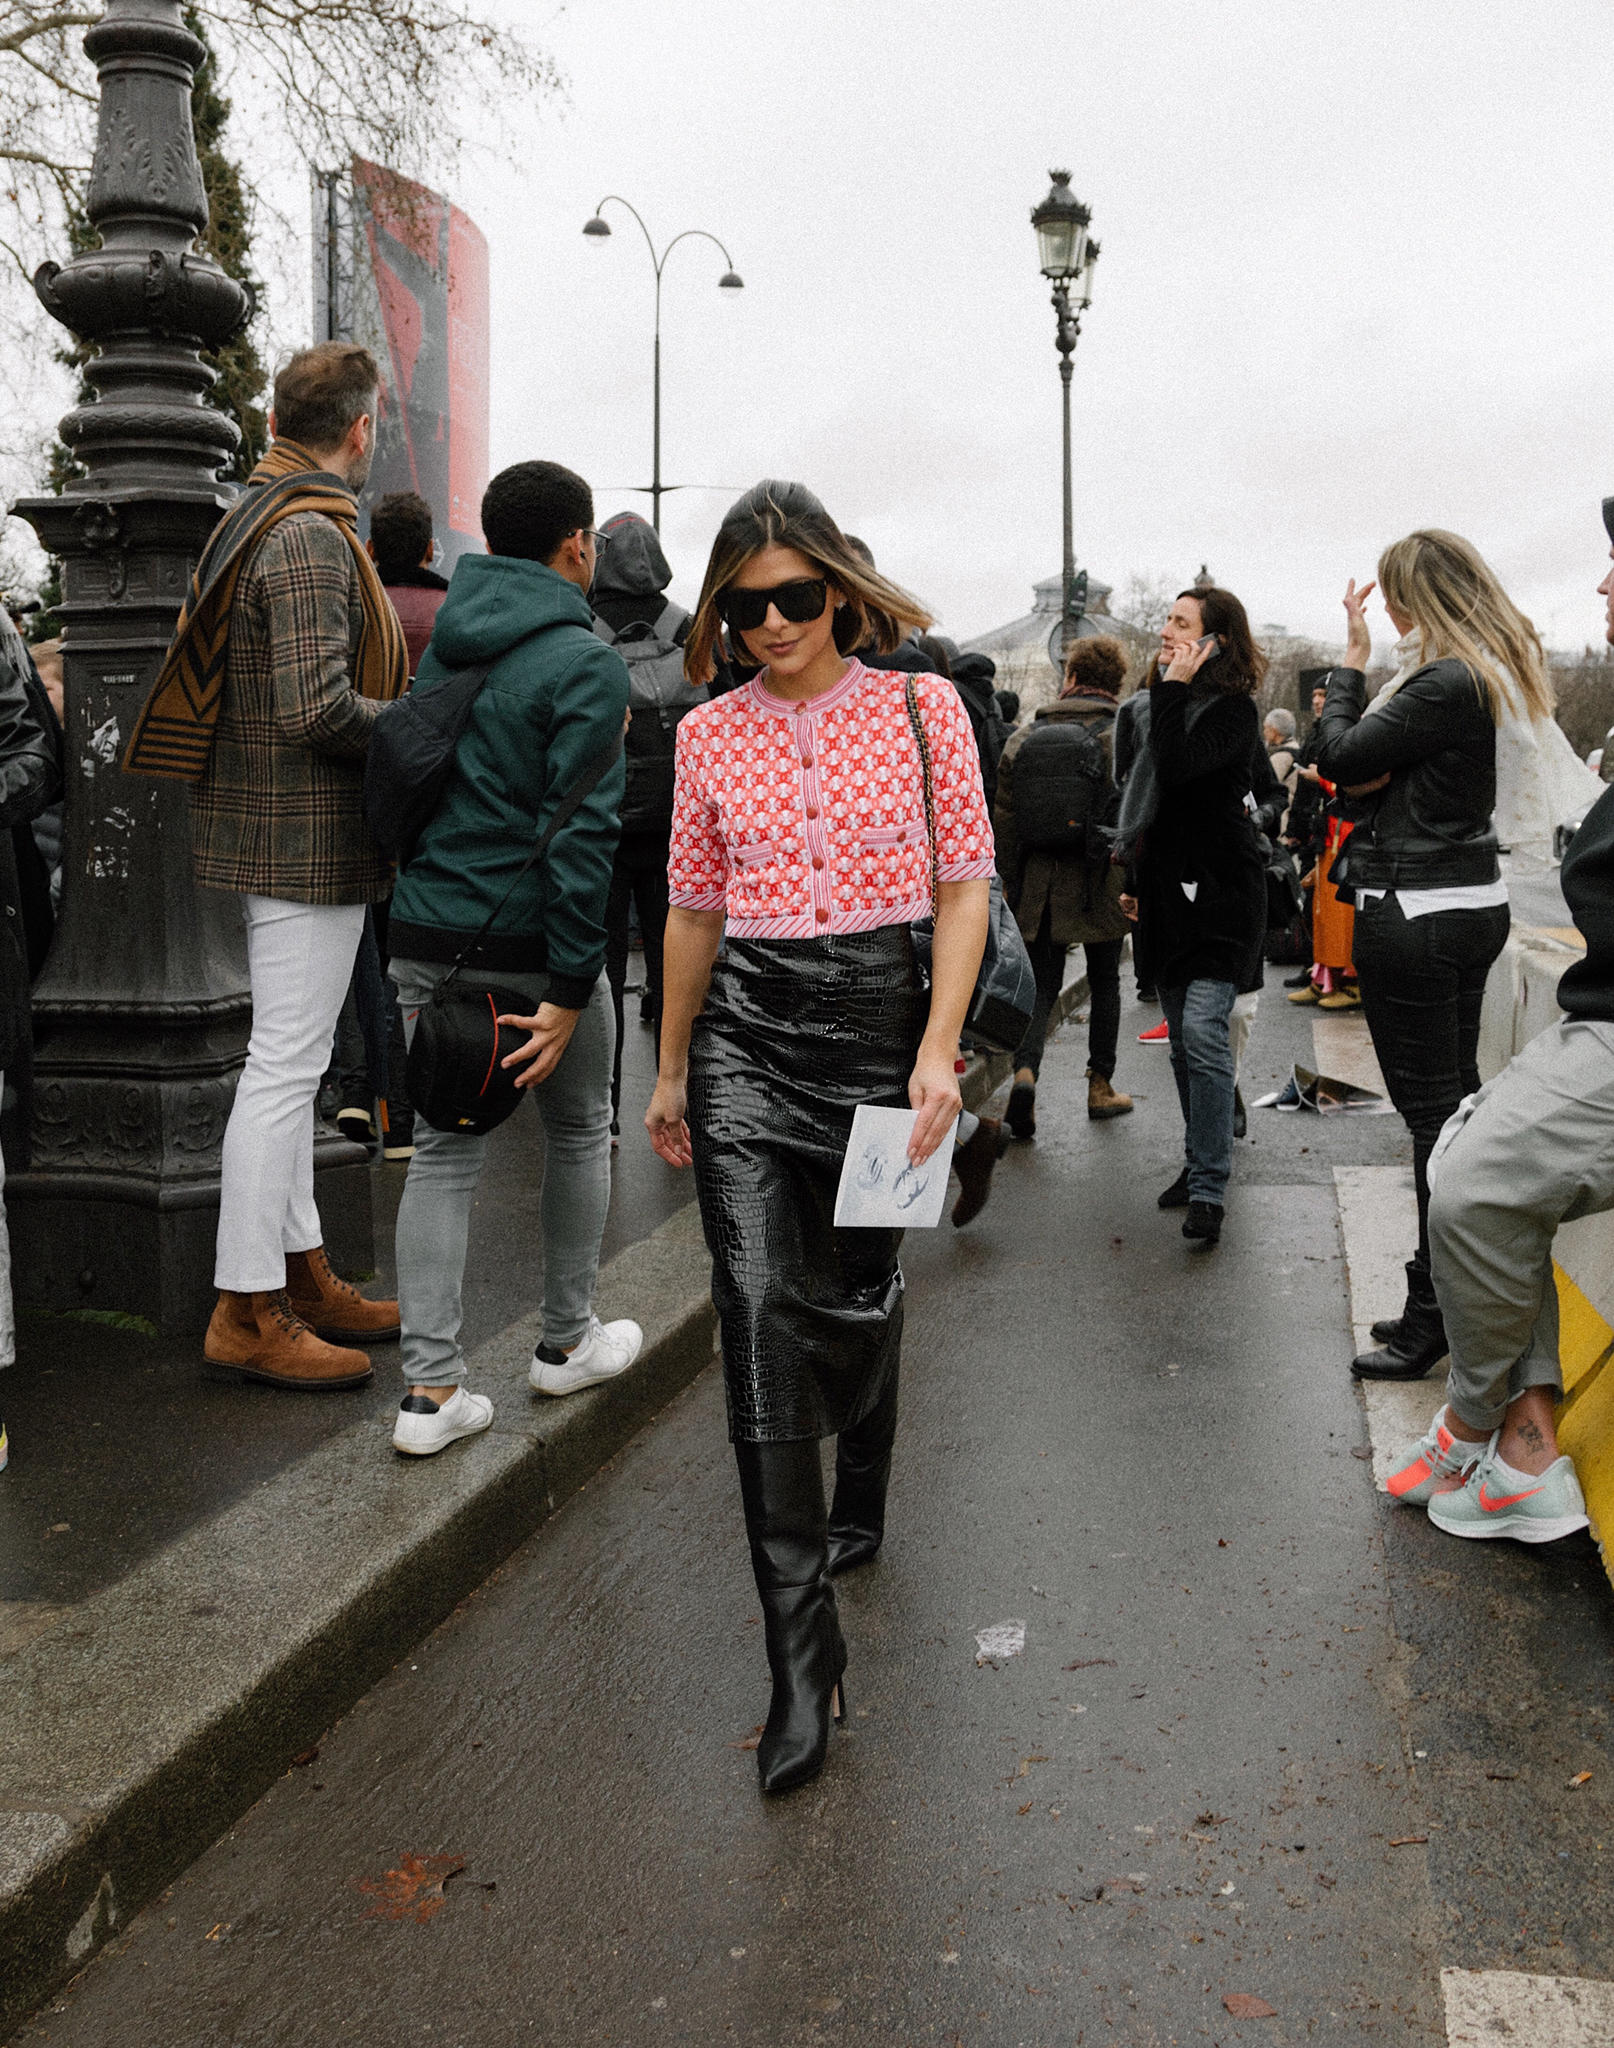 5 Standout Moments from the Chanel FW19 Fashion Show by Pam Hetlinger | TheGirlFromPanama.com | street style outside chanel fashion show, chanel fw19 fashion show, karl lagerfeld's final chanel show, pfw spring 2019 street style, chanel jacket